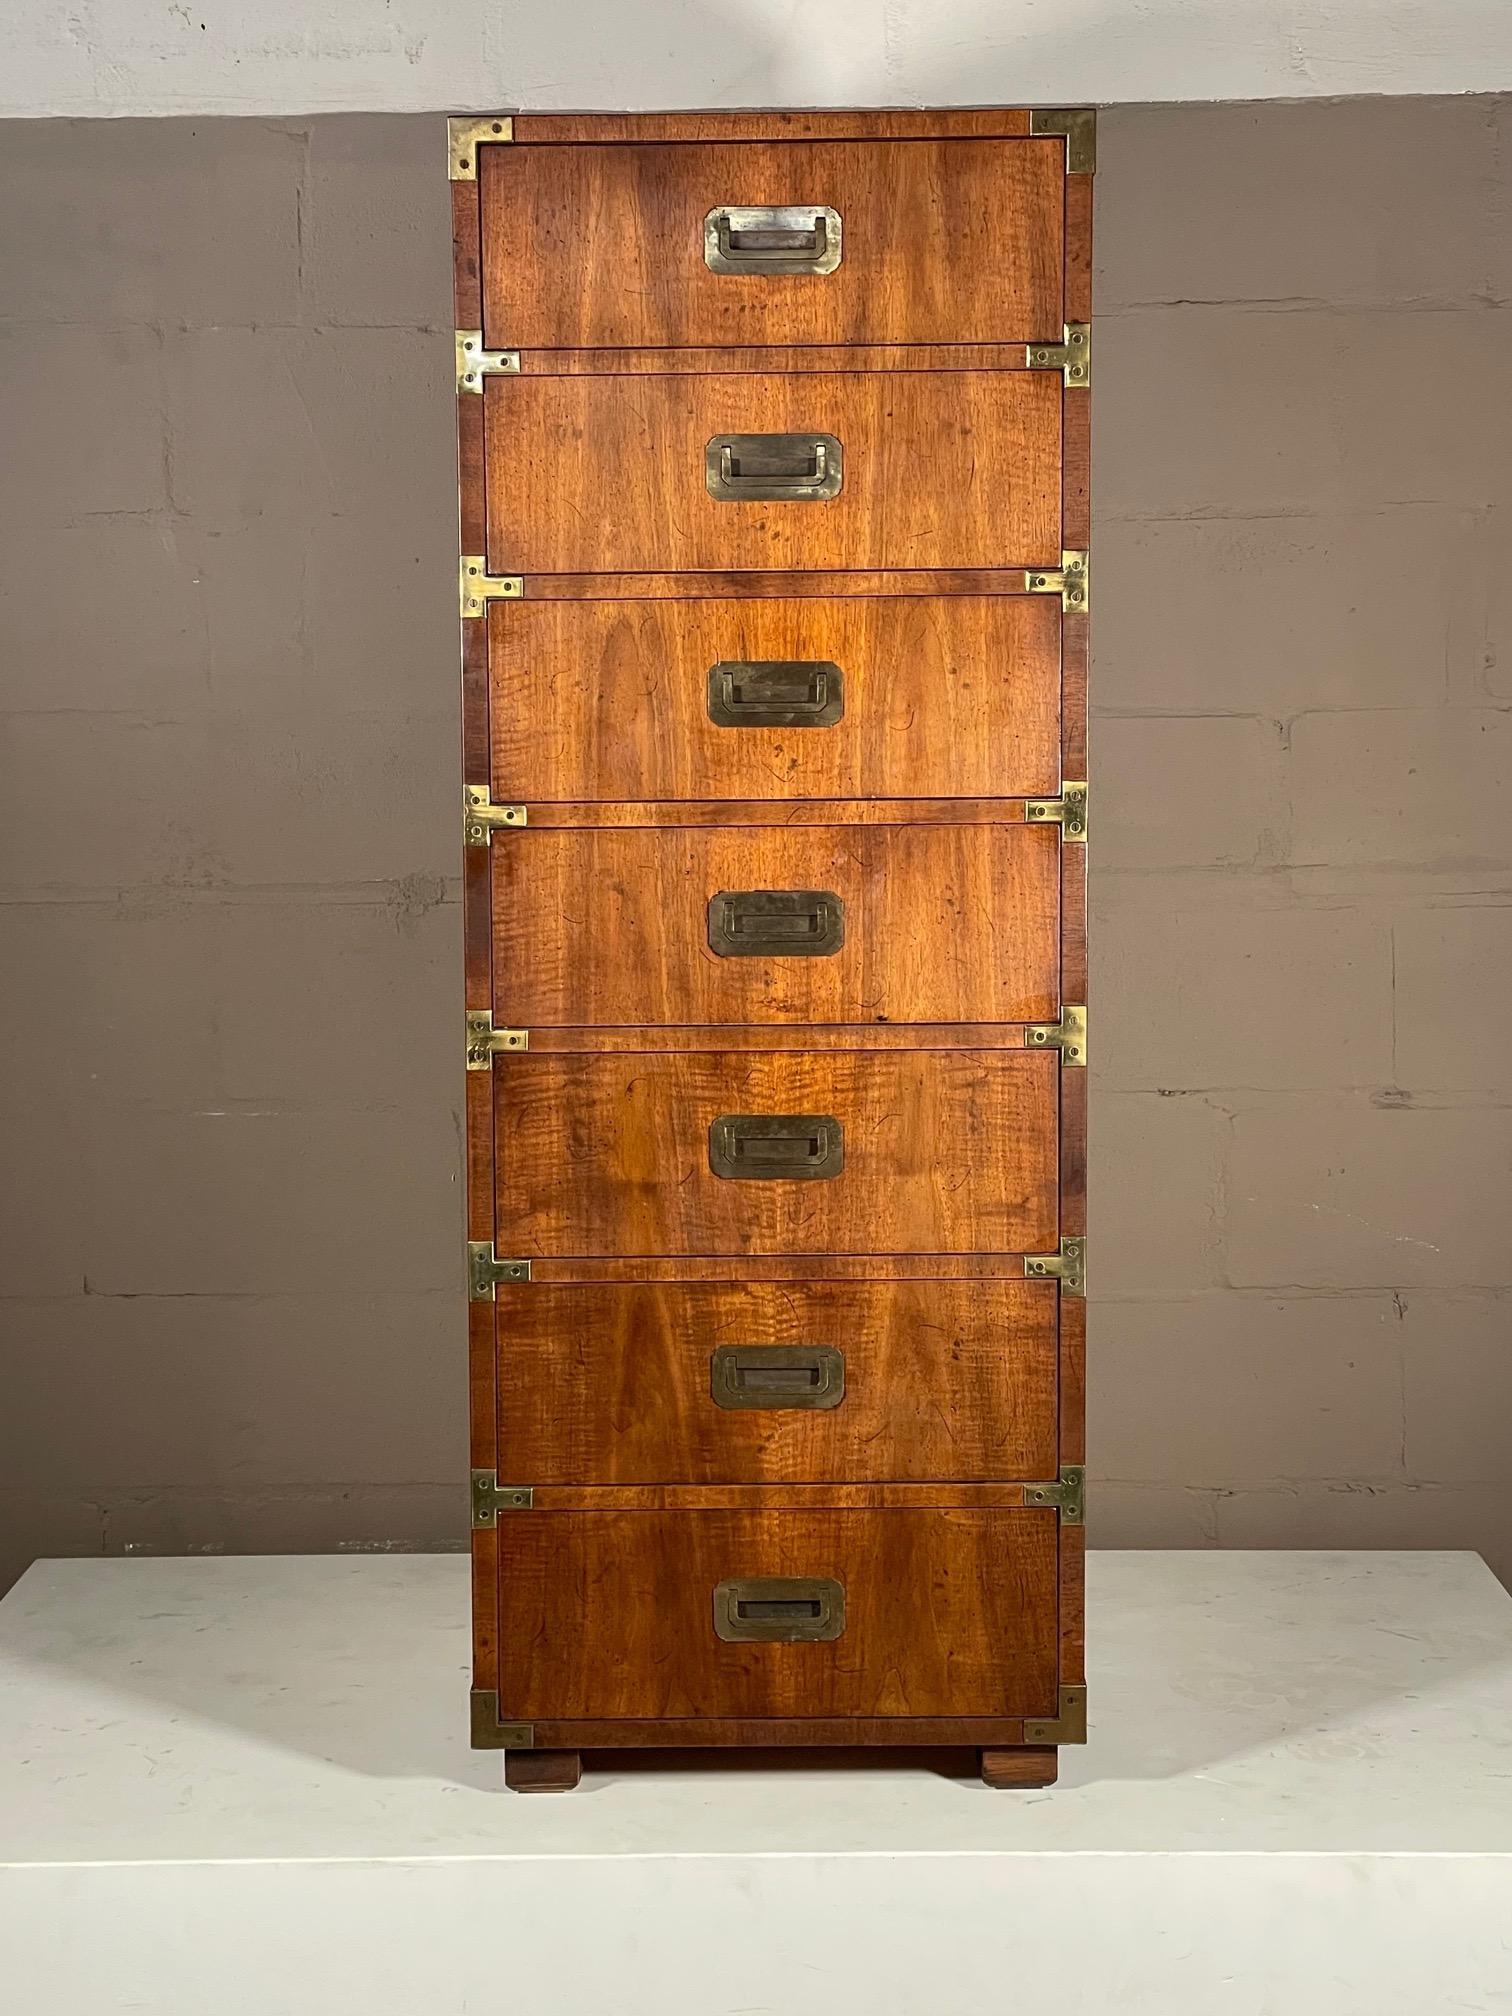 A classic campaign style seven drawer lingerie chest by Henredon with beautiful patina and graining.